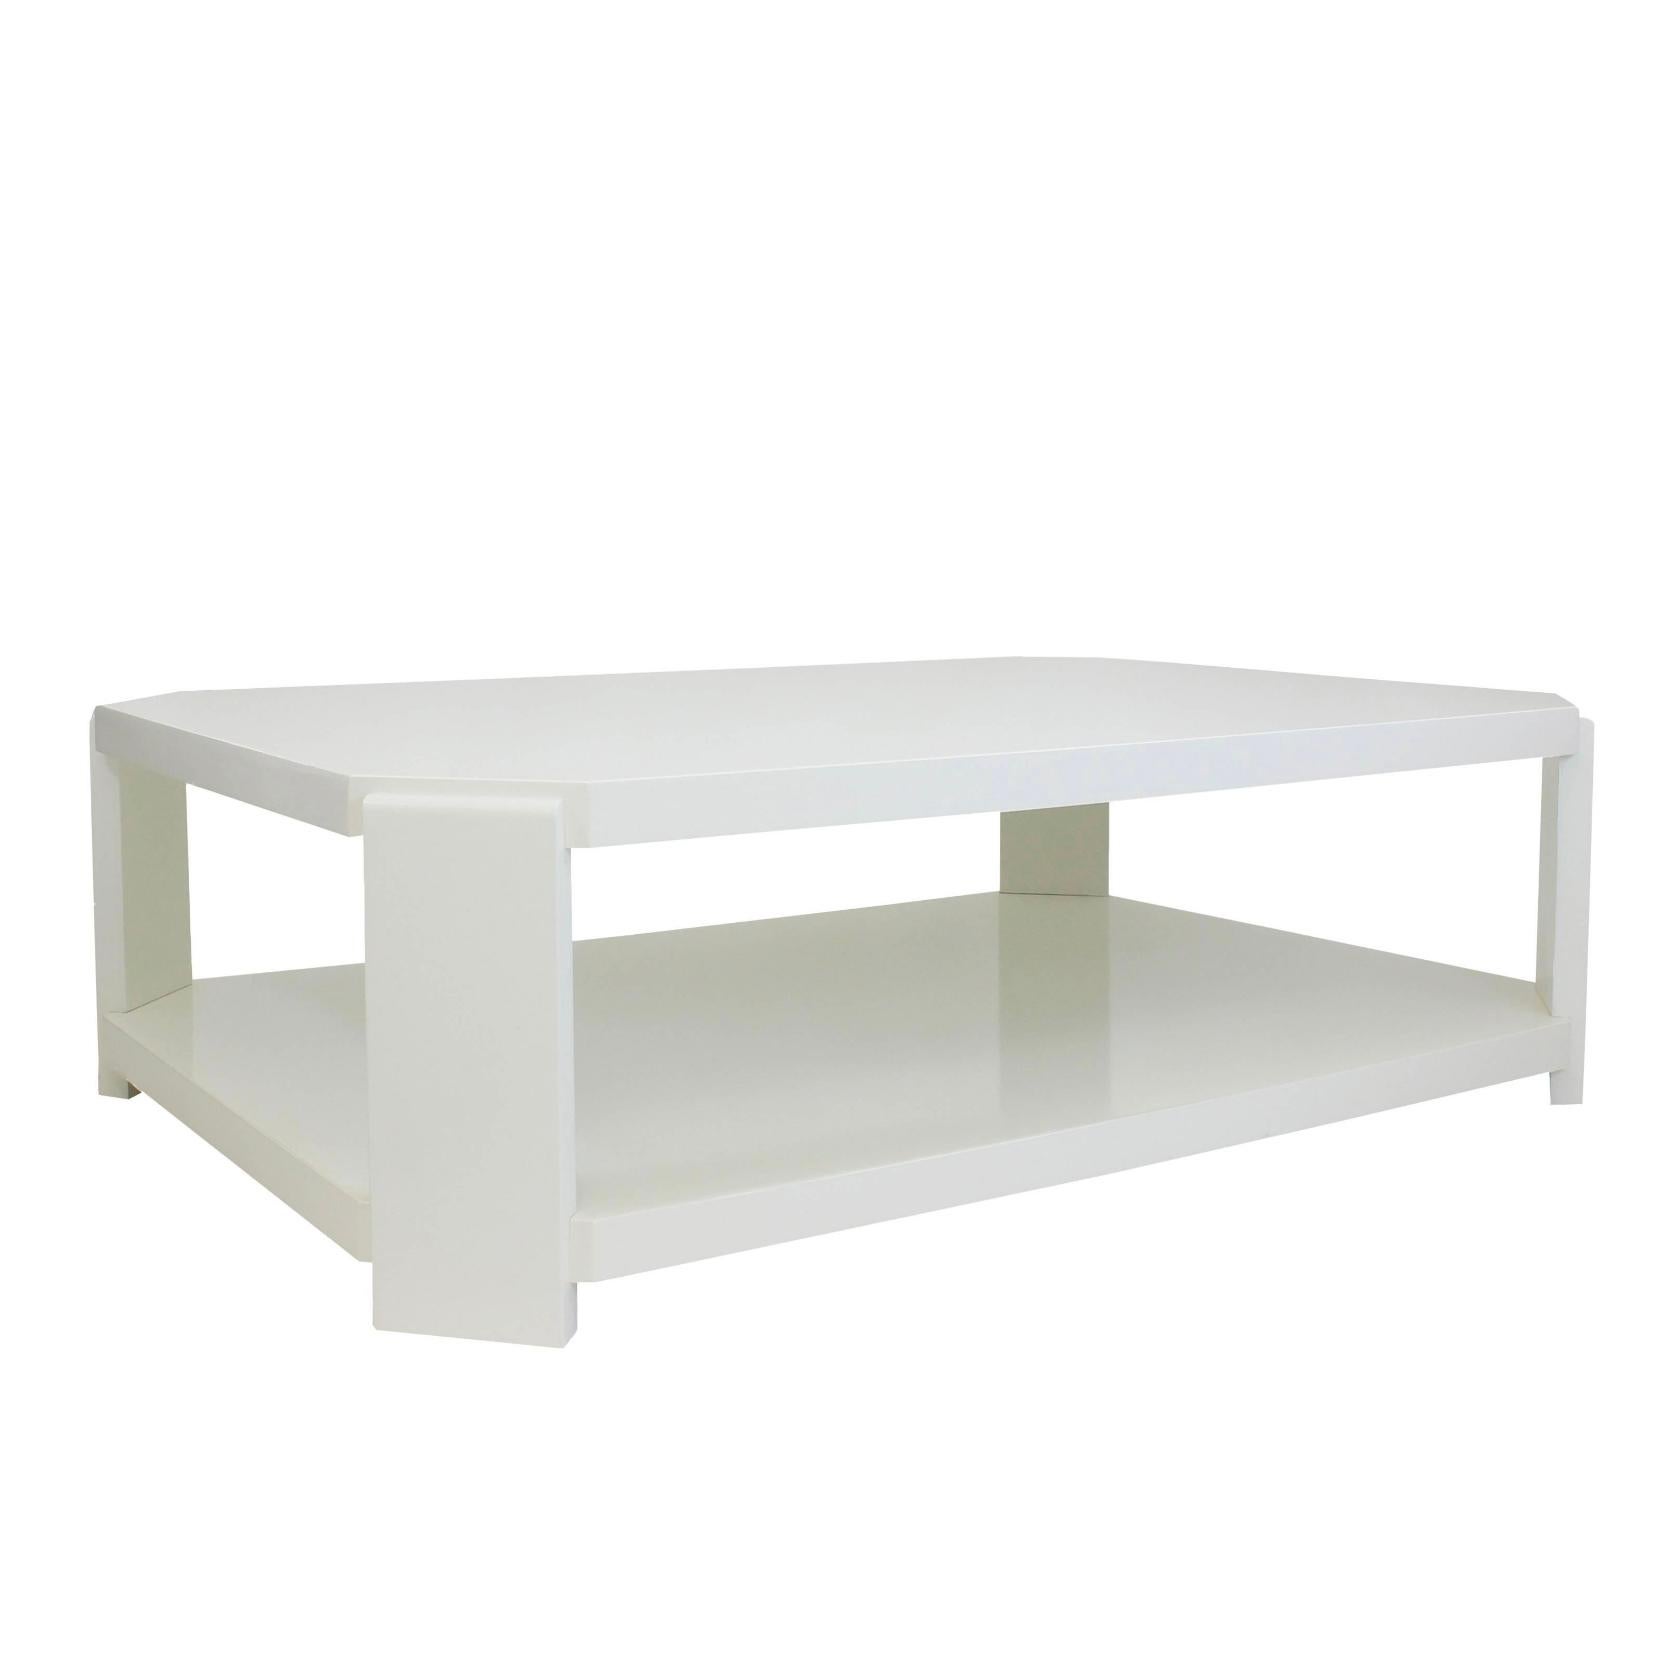 American Modern Octagonal Lacquered Coffee Table For Sale